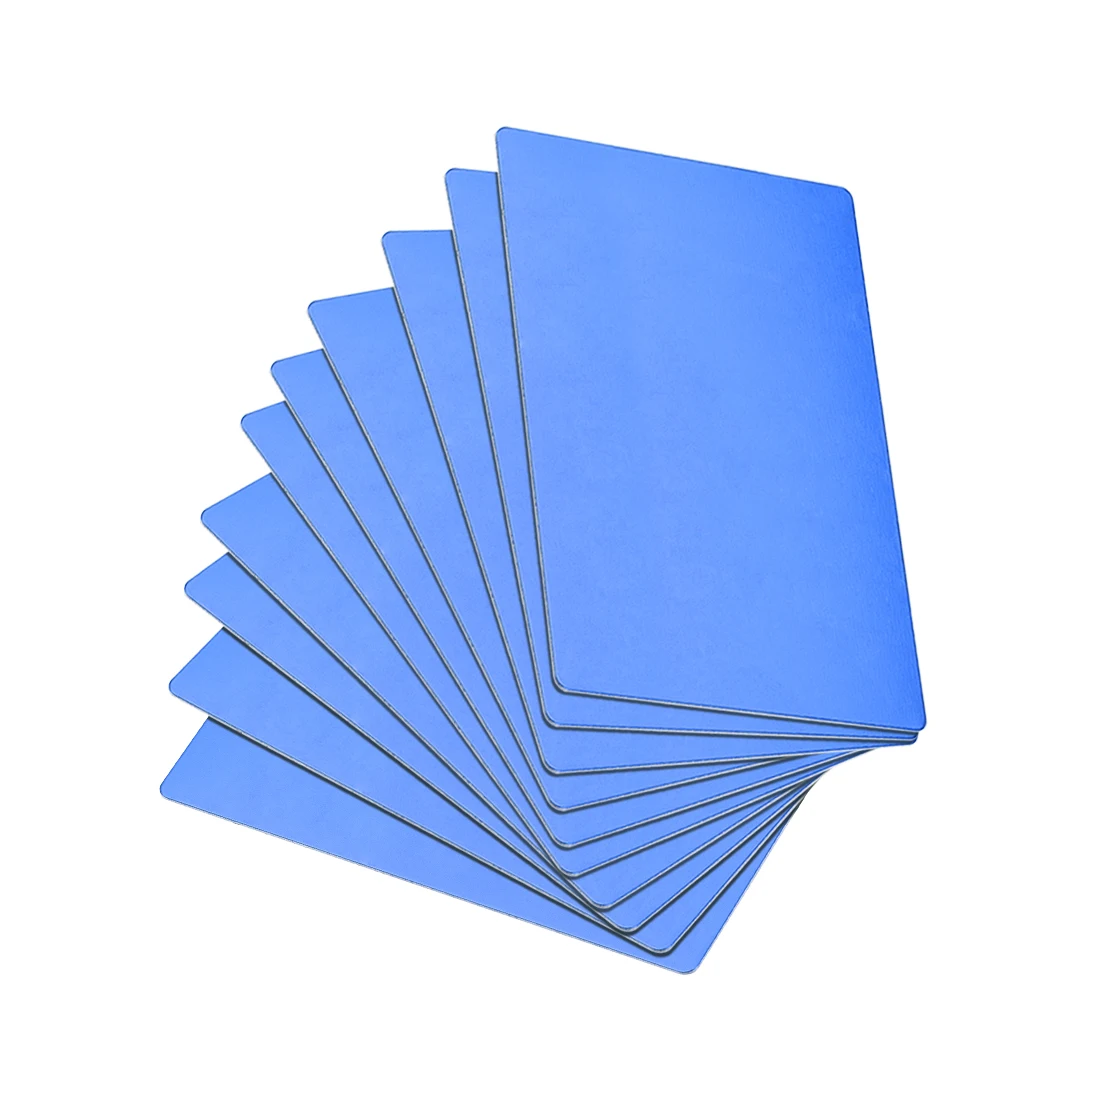 10Pcs Blank Metal Card 88x53x0.6mm Anodized Aluminum Plate for DIY Laser Printing Engraving Blue/Red 100 sheets 0 45mm 86 54mm blank sublimation metal plate aluminium sheet name card printing sublimation ink transfer diy craft